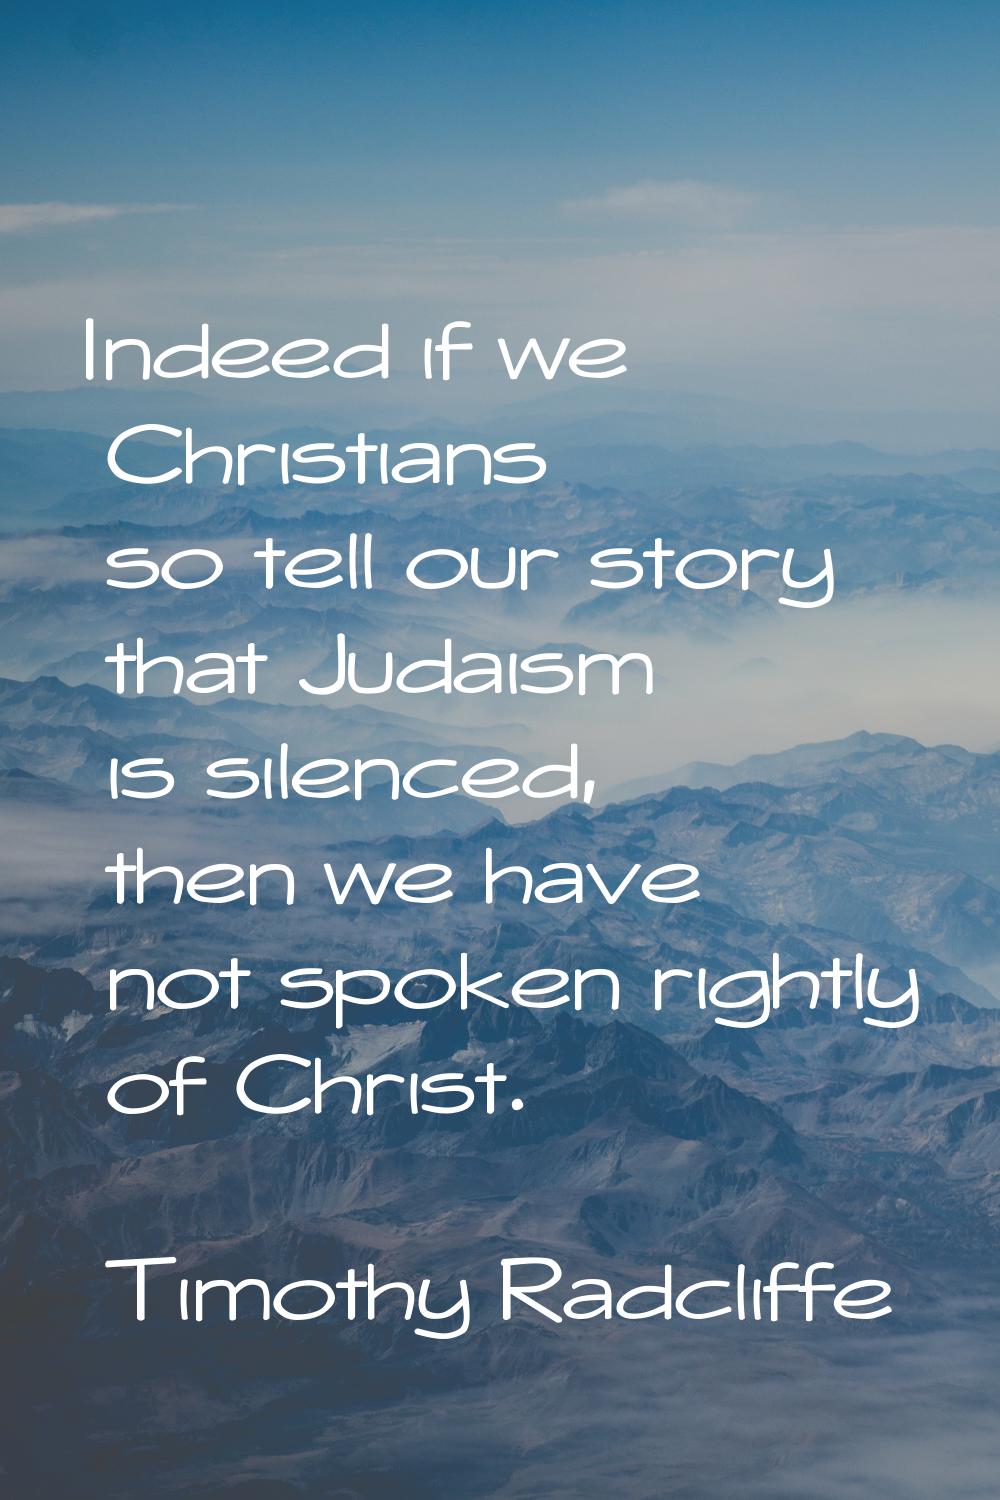 Indeed if we Christians so tell our story that Judaism is silenced, then we have not spoken rightly